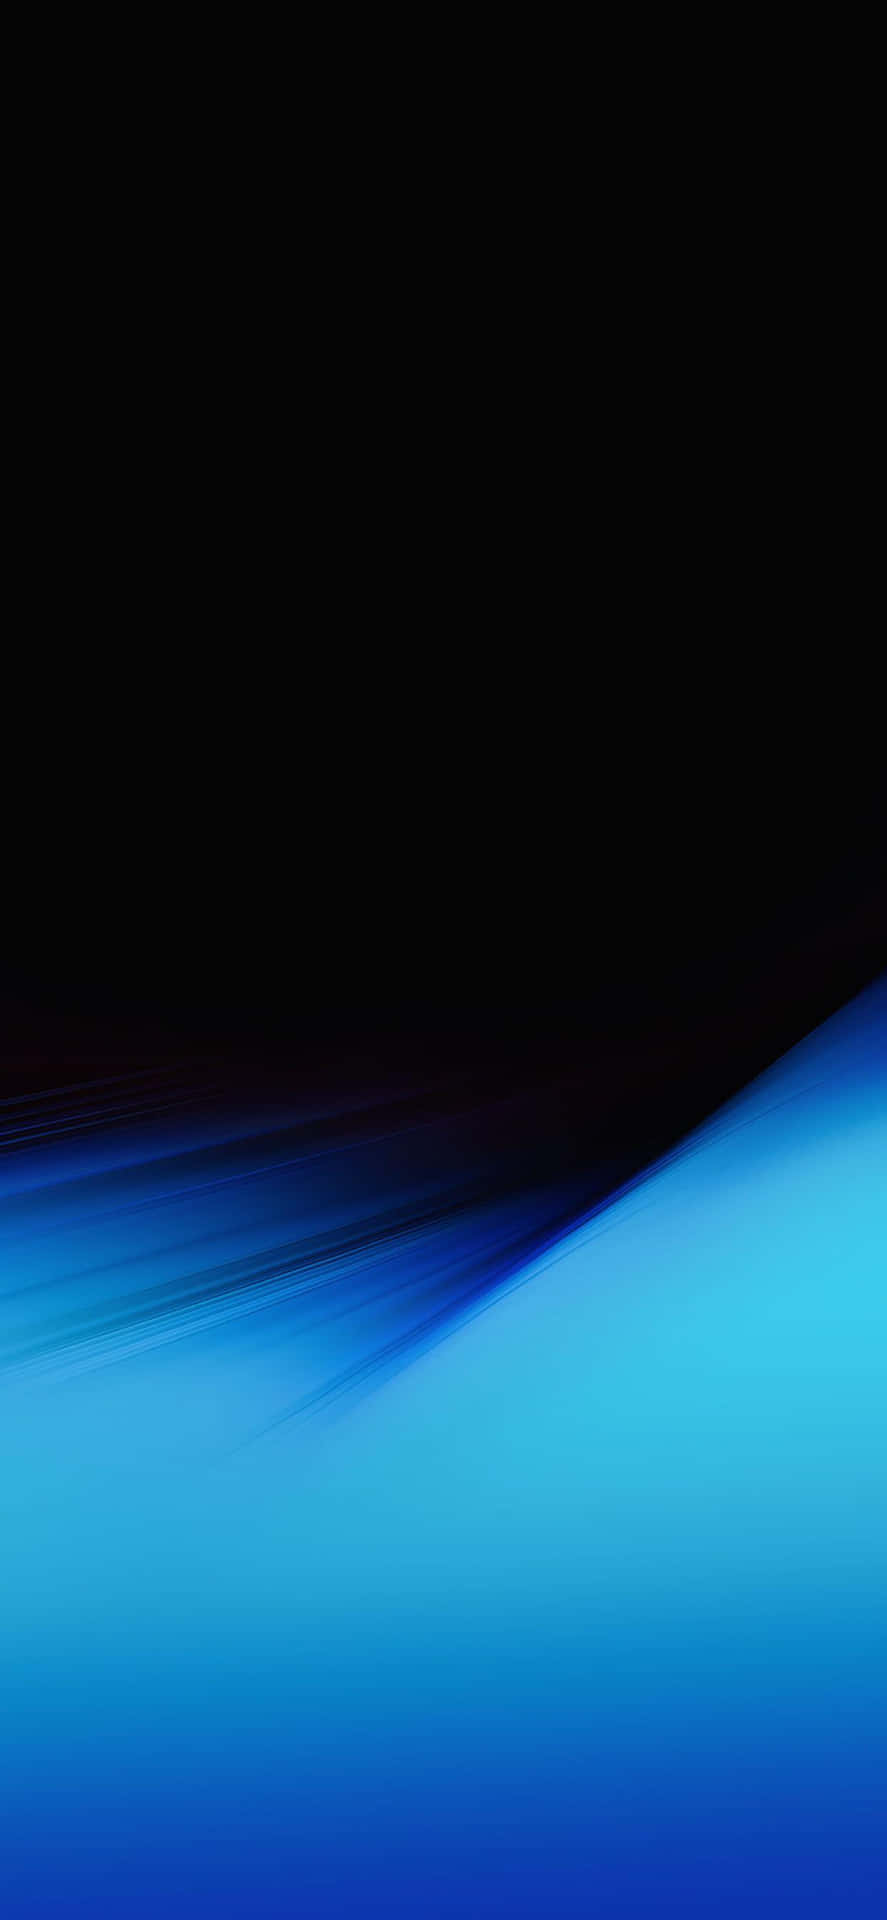 A Blue And Black Background With A Blurred Background